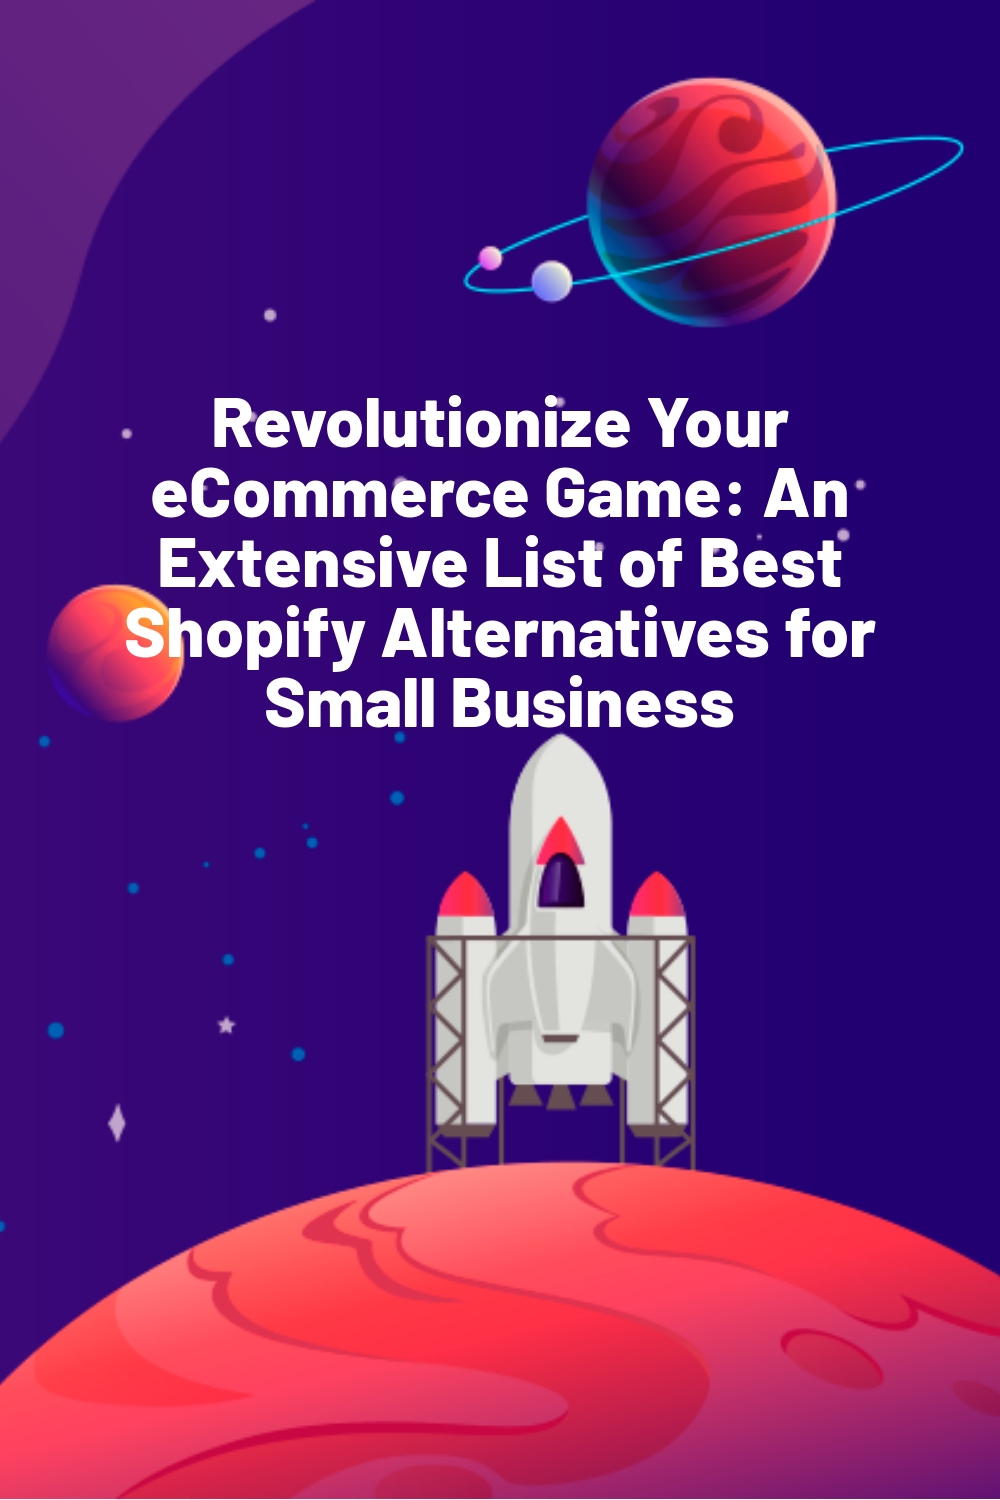 Revolutionize Your eCommerce Game: An Extensive List of Best Shopify Alternatives for Small Business